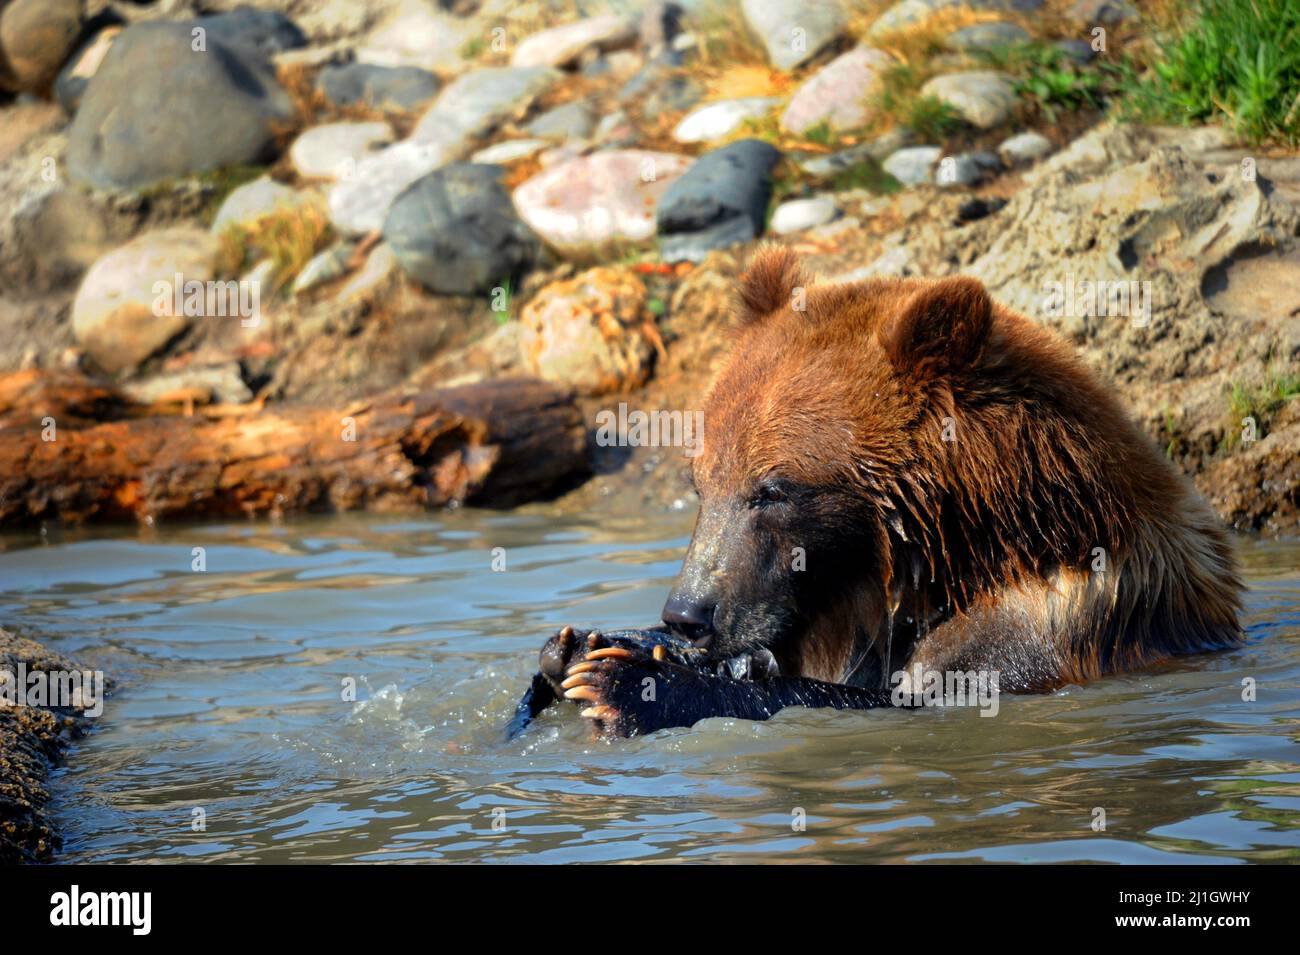 Young grizzly bear holds a fish in its paws and eats it while sitting in a pool of water. Stock Photo